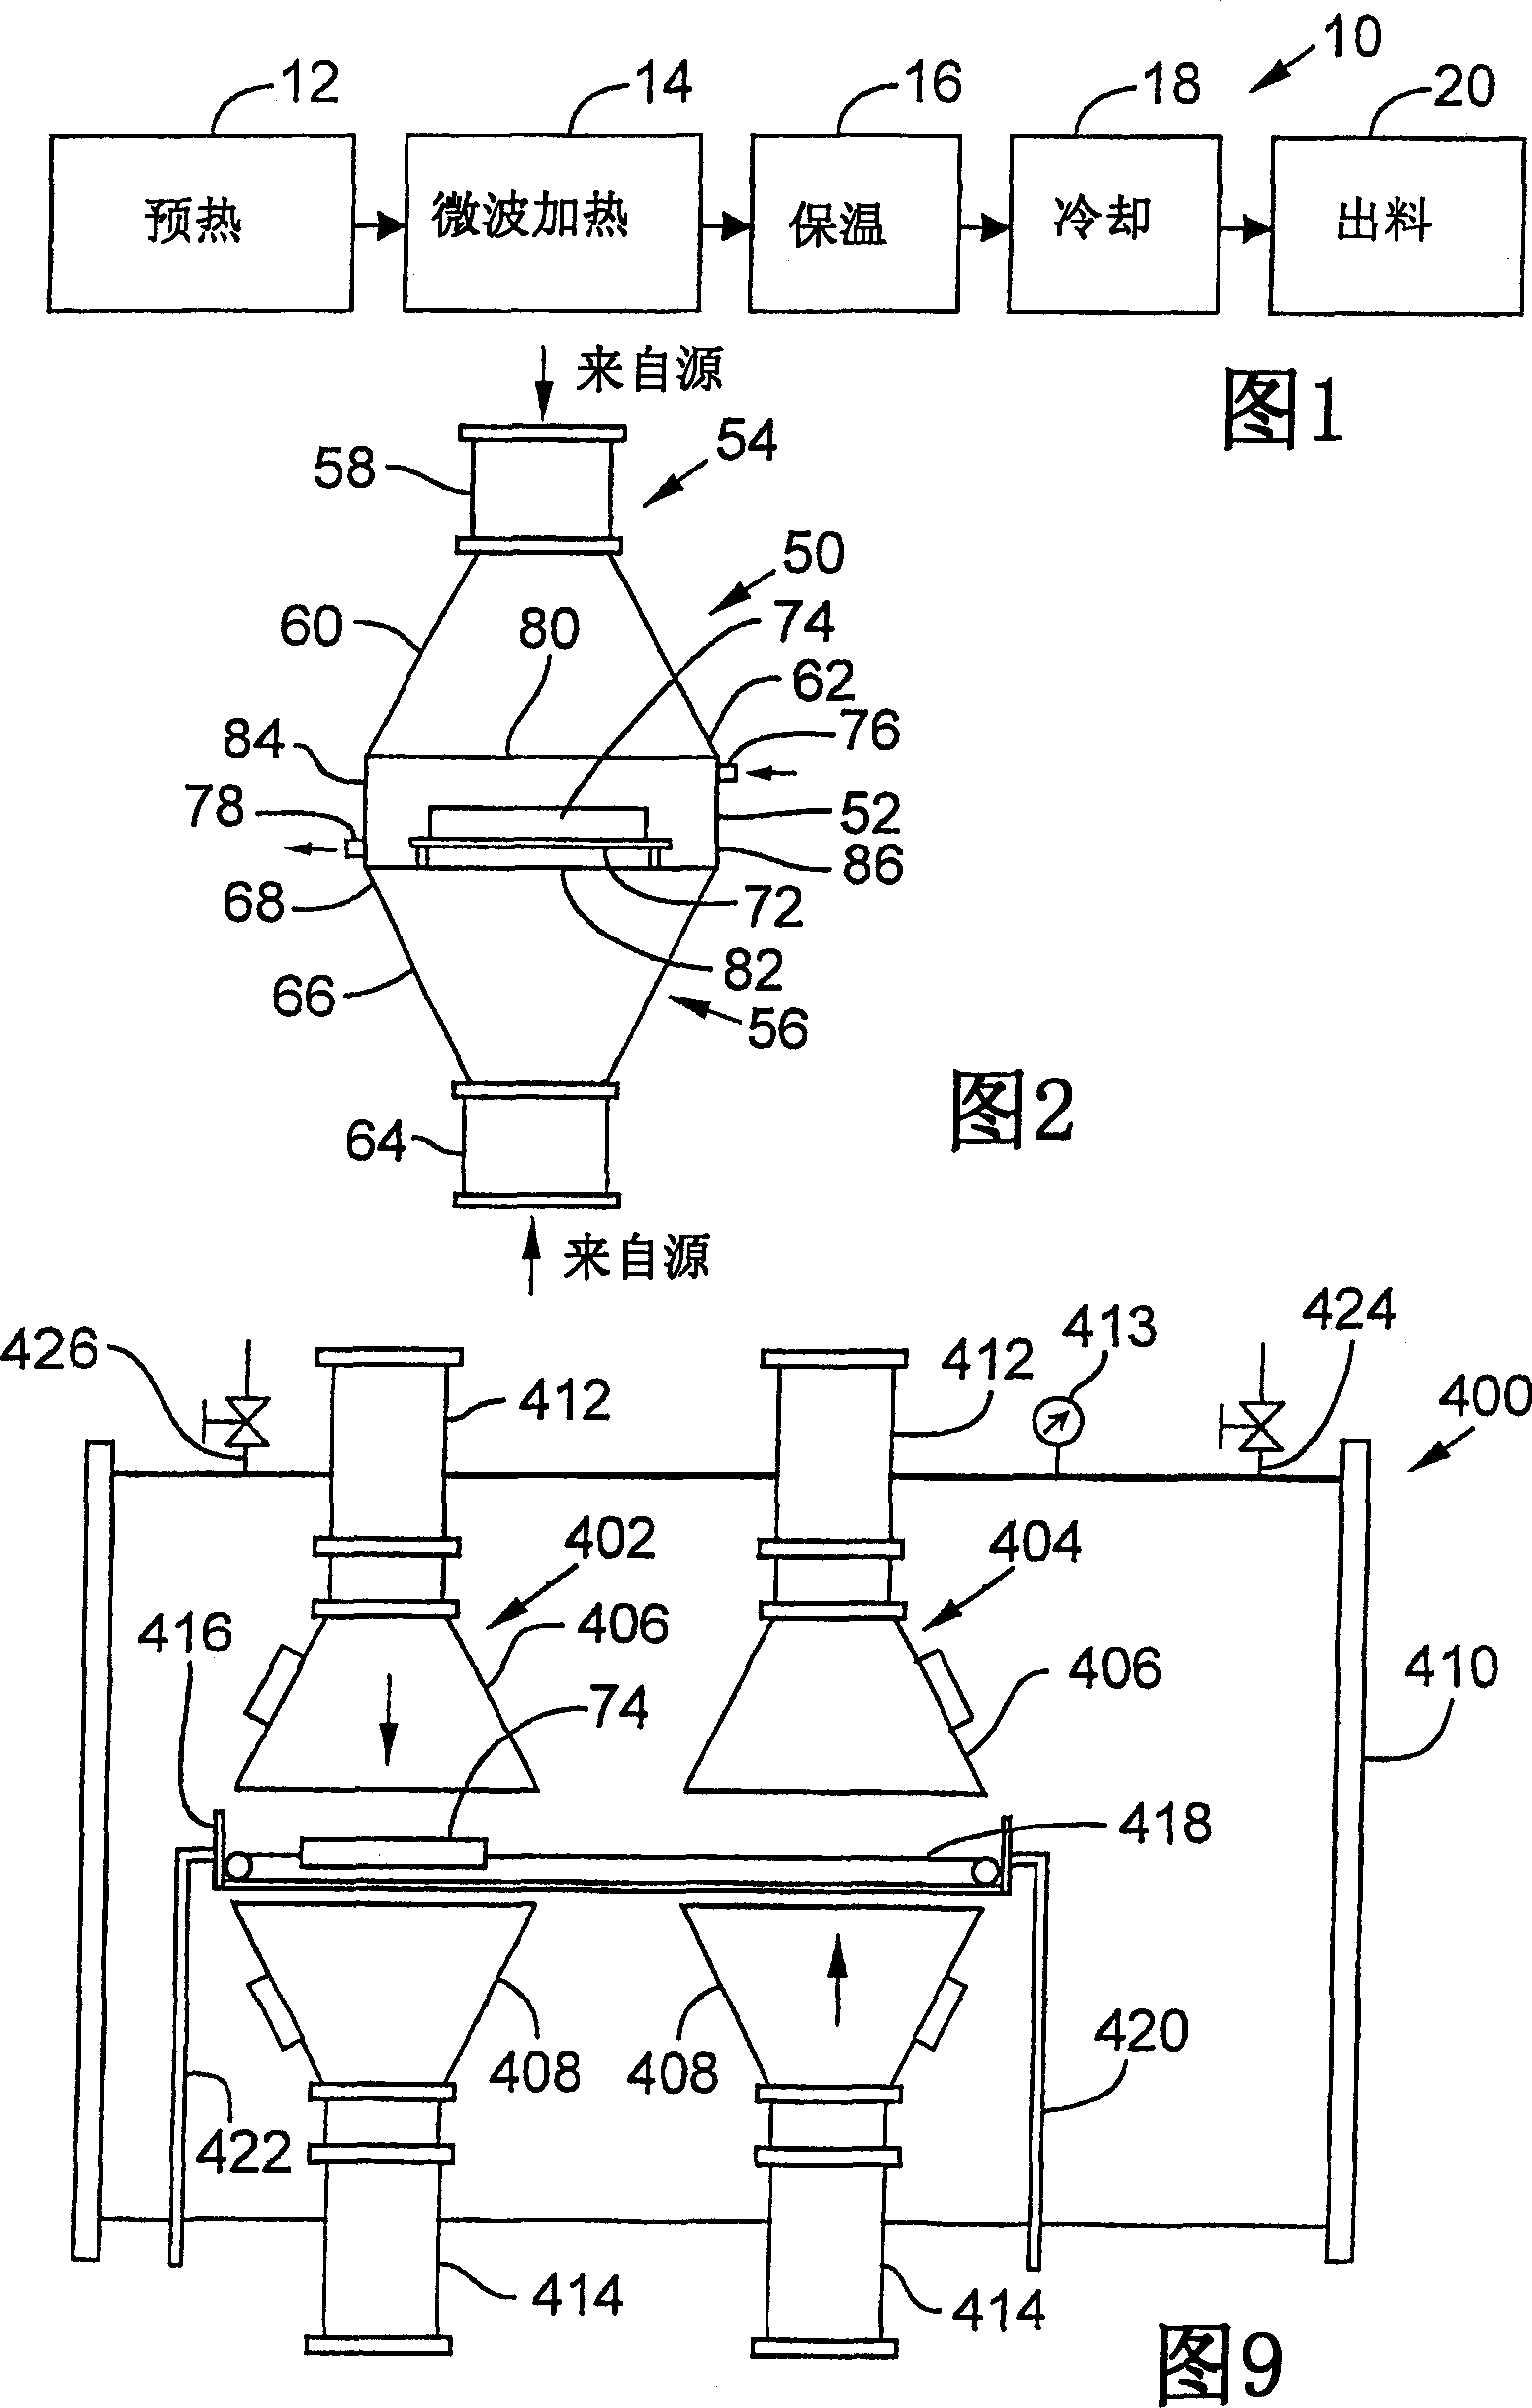 Apparatus and method for heating objects with microwaves